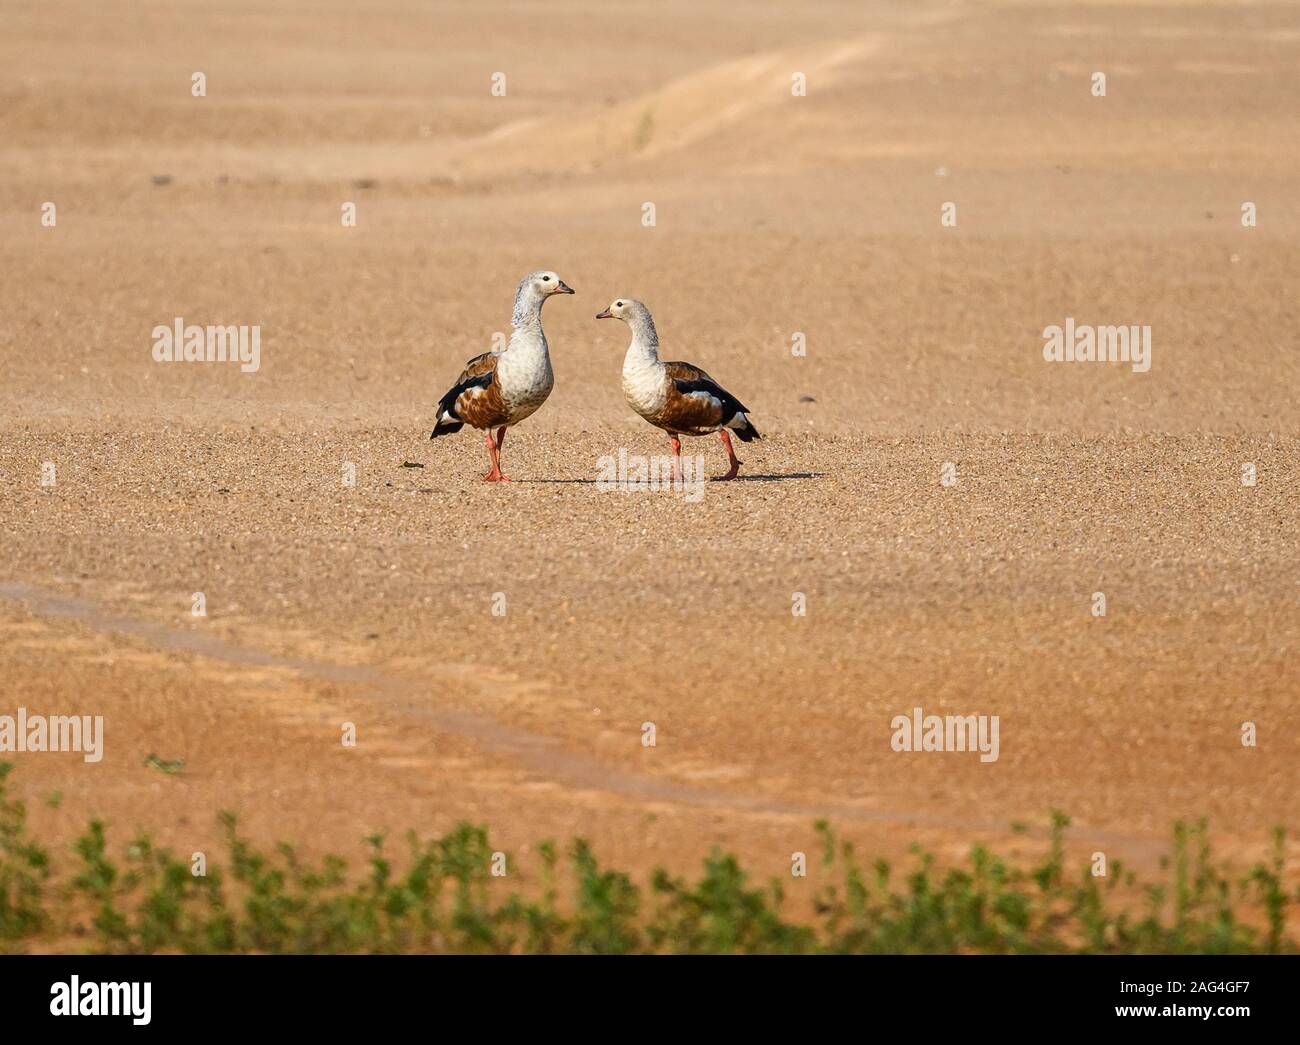 A pair of Orinoco Geese (Neochen jubata) walk on the sand bars along Rio Javaes in the Amazon Basin. Tocantins, Brazil. Stock Photo